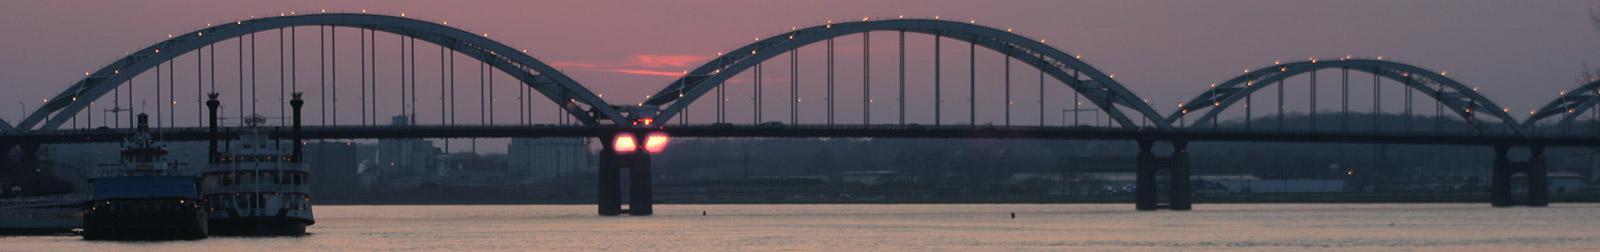 Banner for Newhouse Health Solutions featuring a picture of the Centennial Bridge crossing the Mississippi River at sunset from Moline, Illinois that includes a picture of the Celebration Belle riverboat